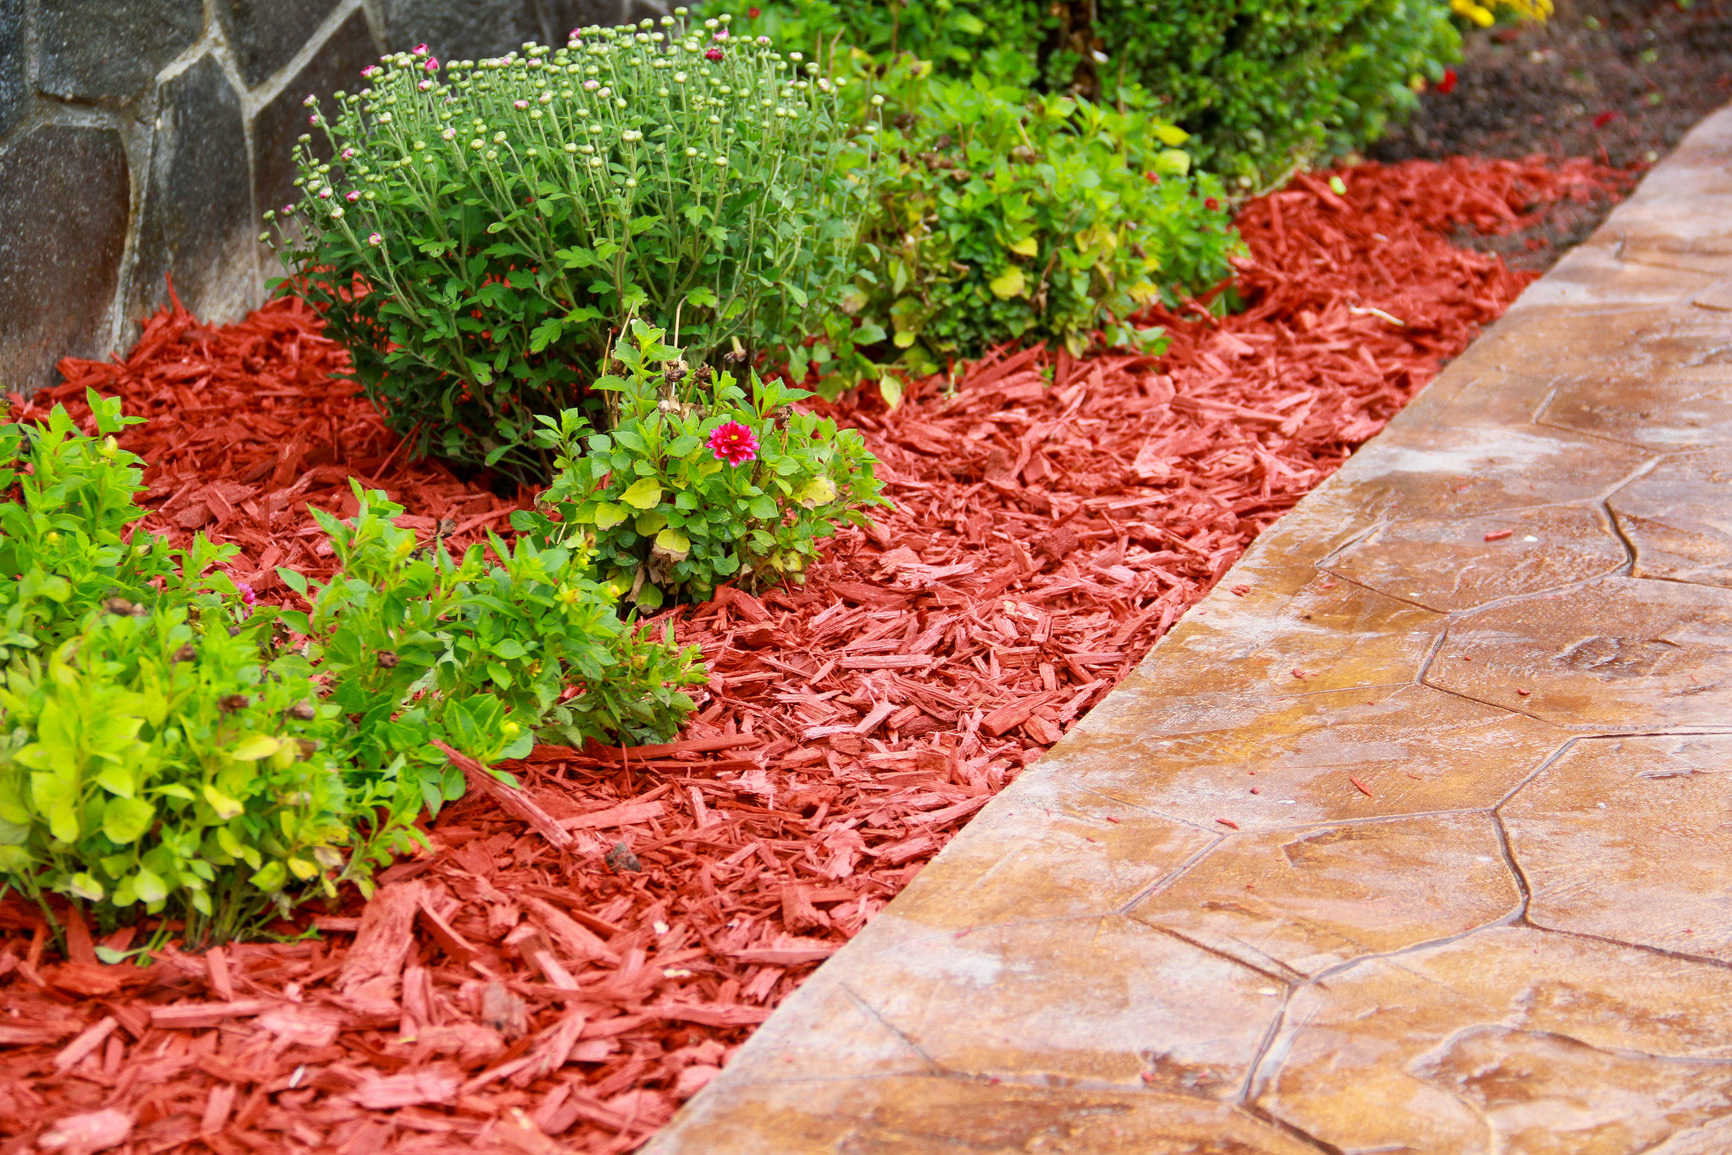 Red mulch landscaping